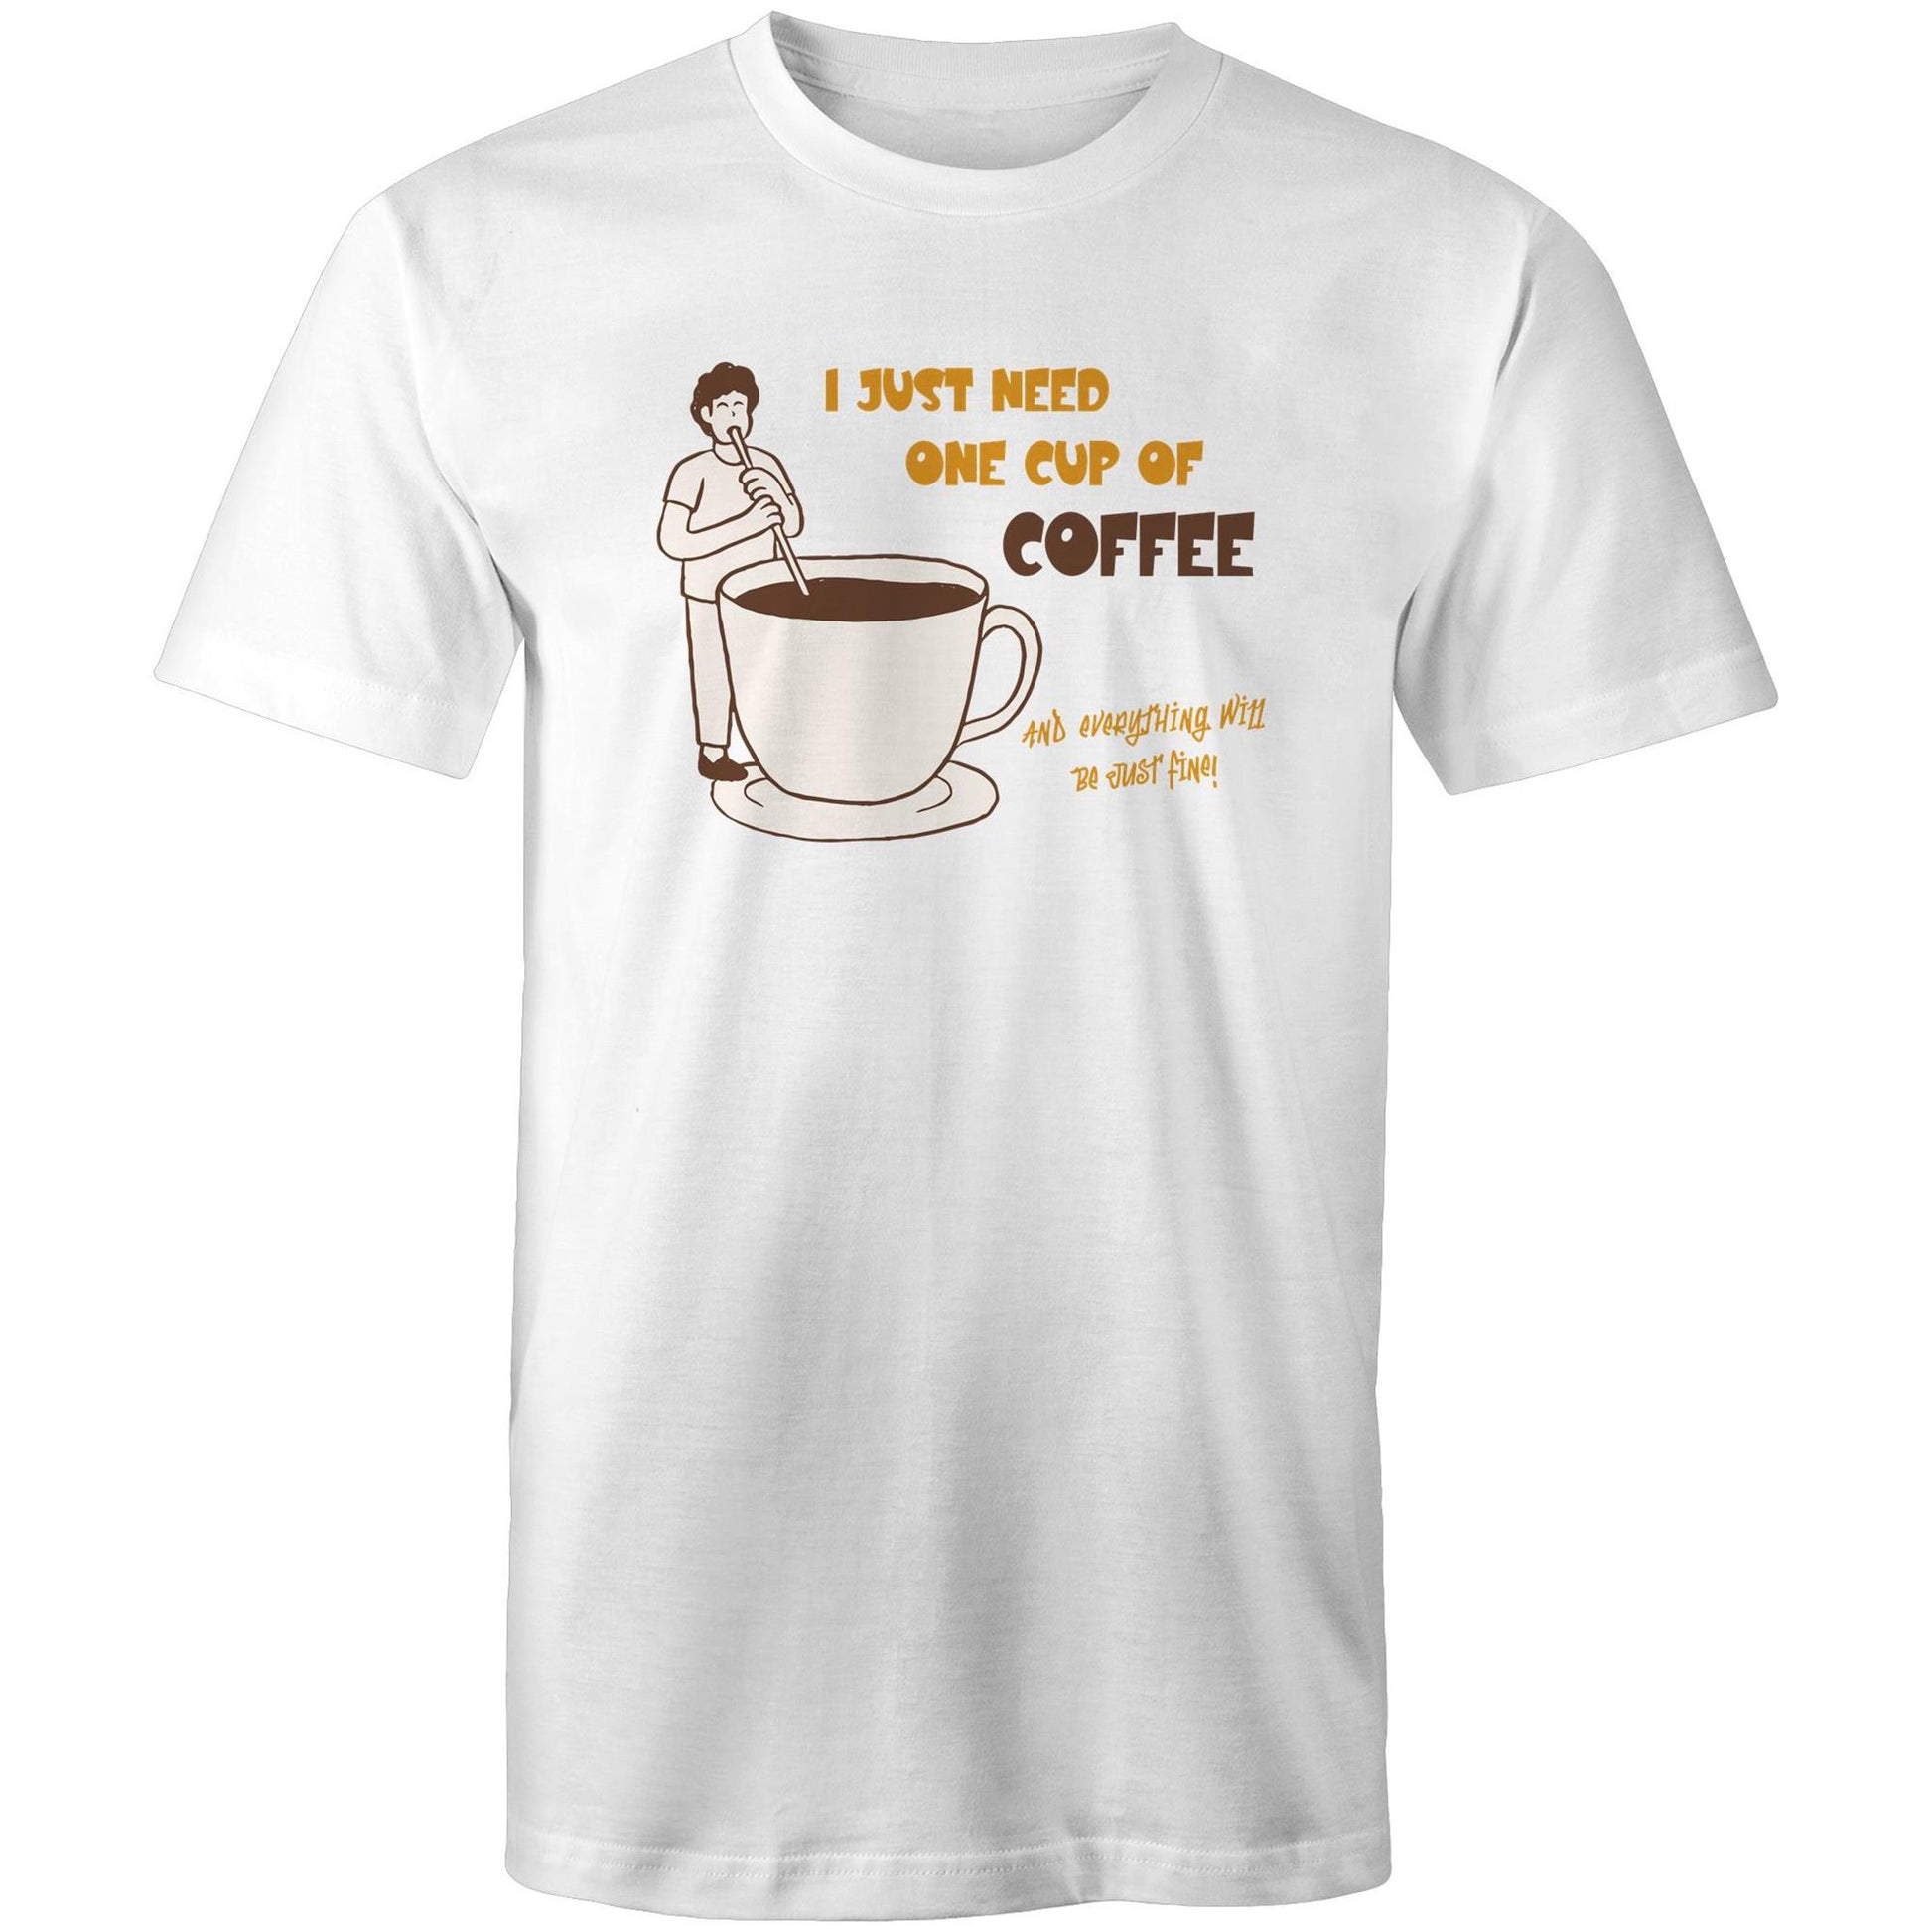 I Just Need One Cup Of Coffee And Everything Will Be Just Fine - Mens T-Shirt White Mens T-shirt Coffee